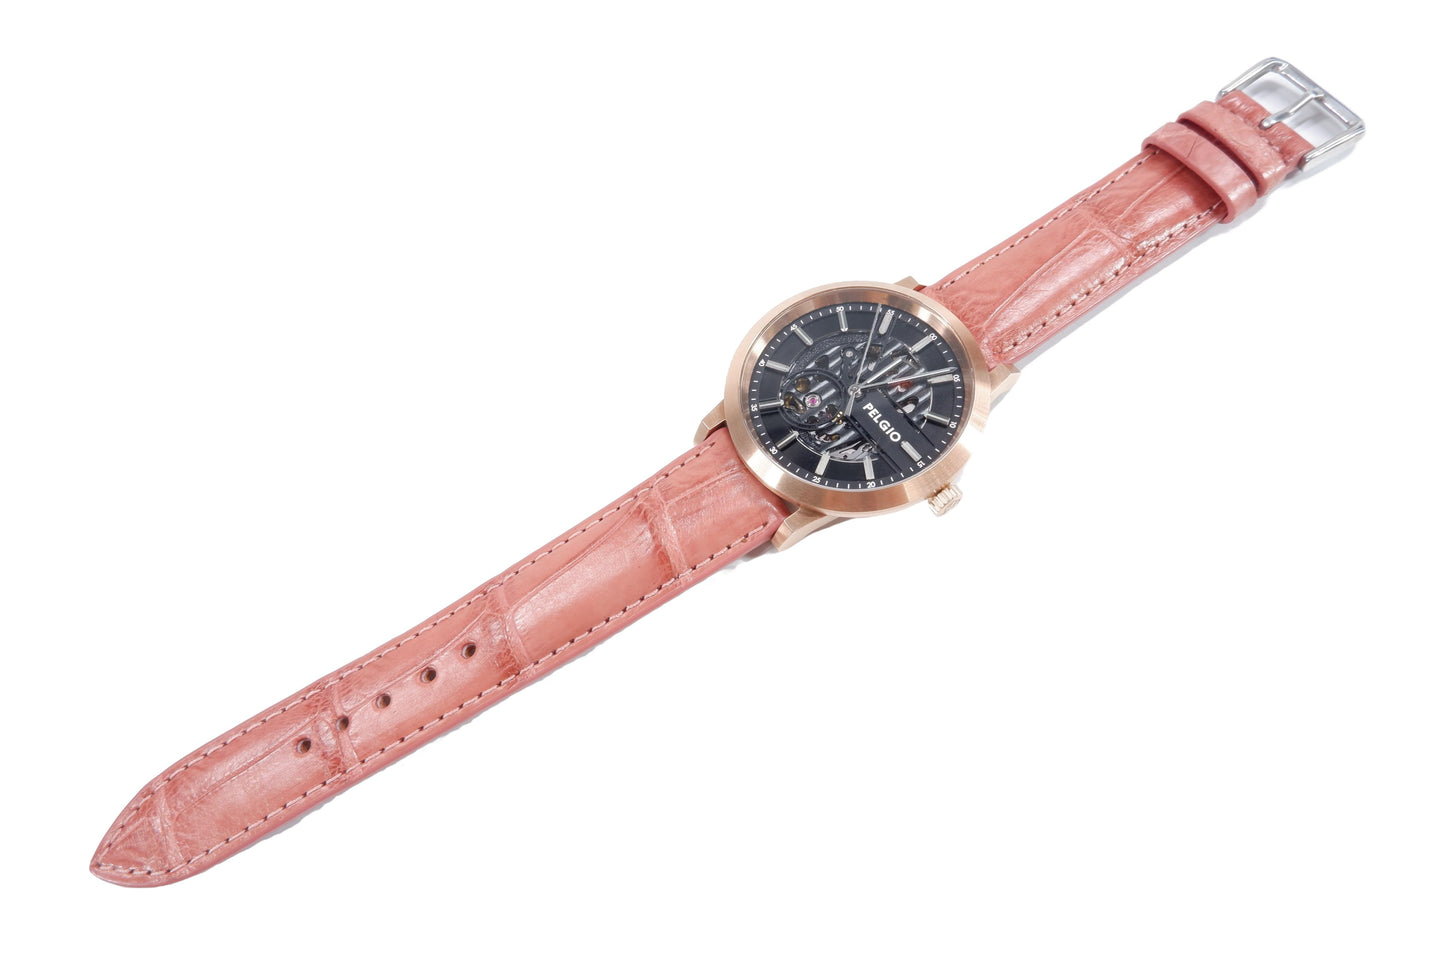 Genuine Crocodile Belly Skin Leather Quick Release Watch Strap Pink Band with Buckle